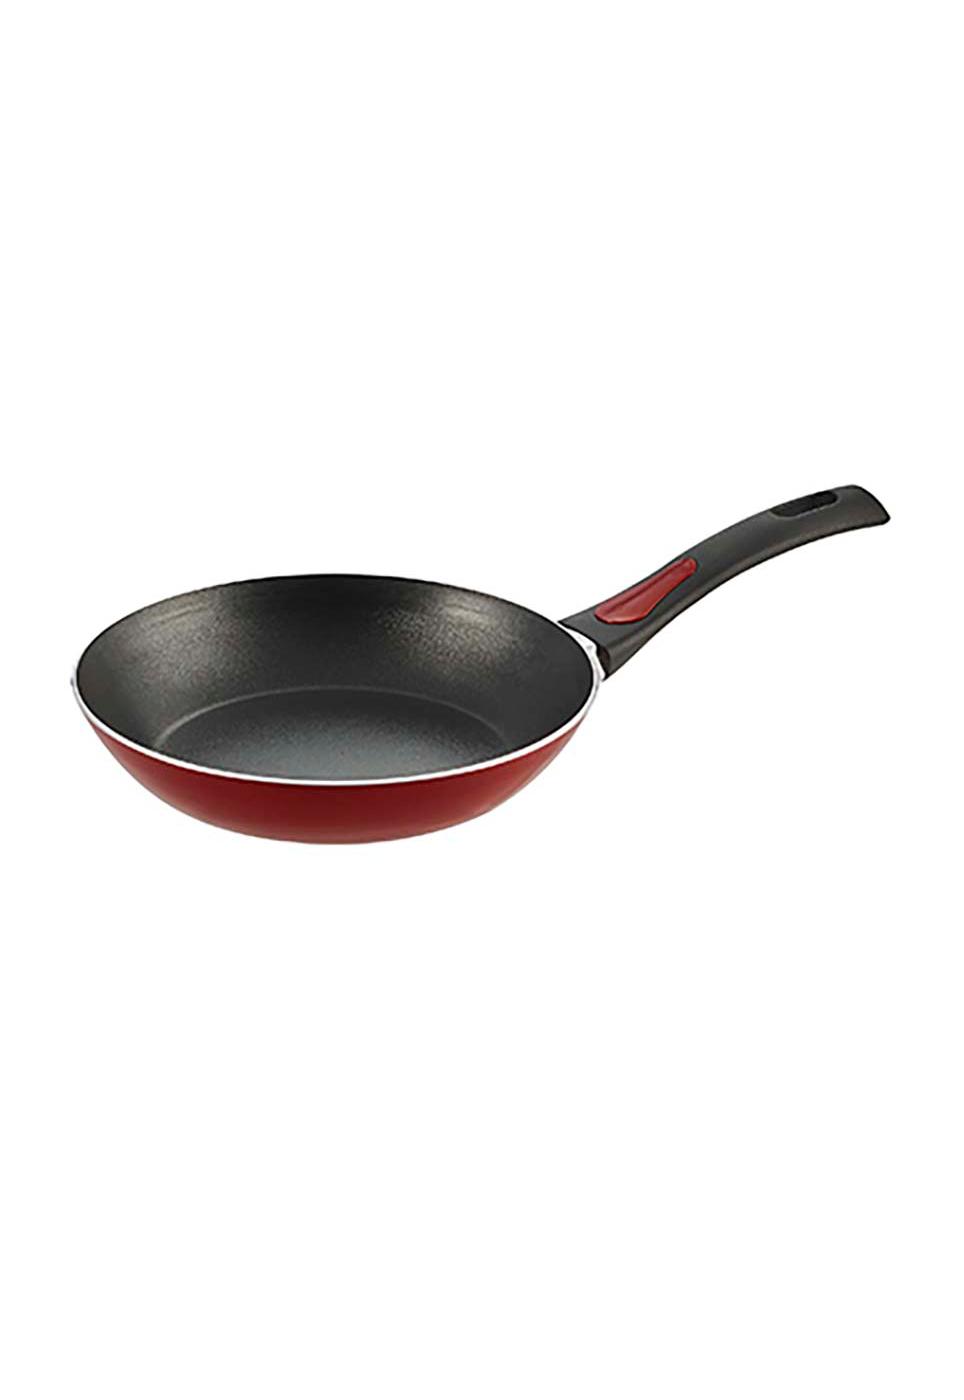 Tramontina Non-Stick Red Cookware Set; image 10 of 14